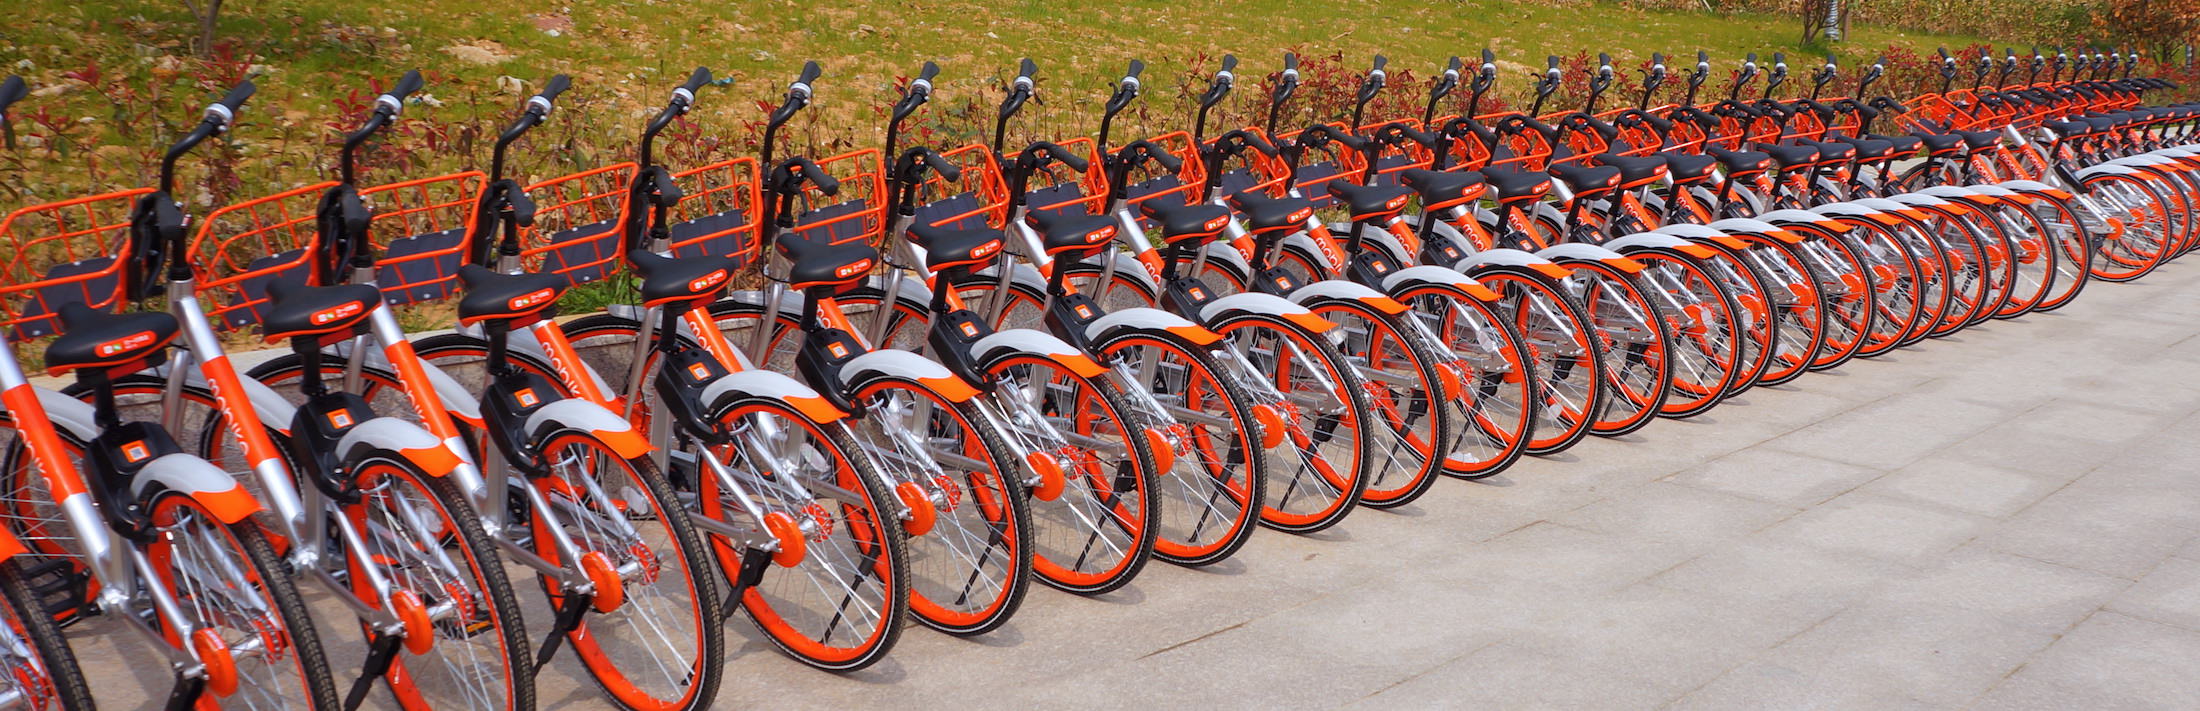 Mobikes in Xuzhuang